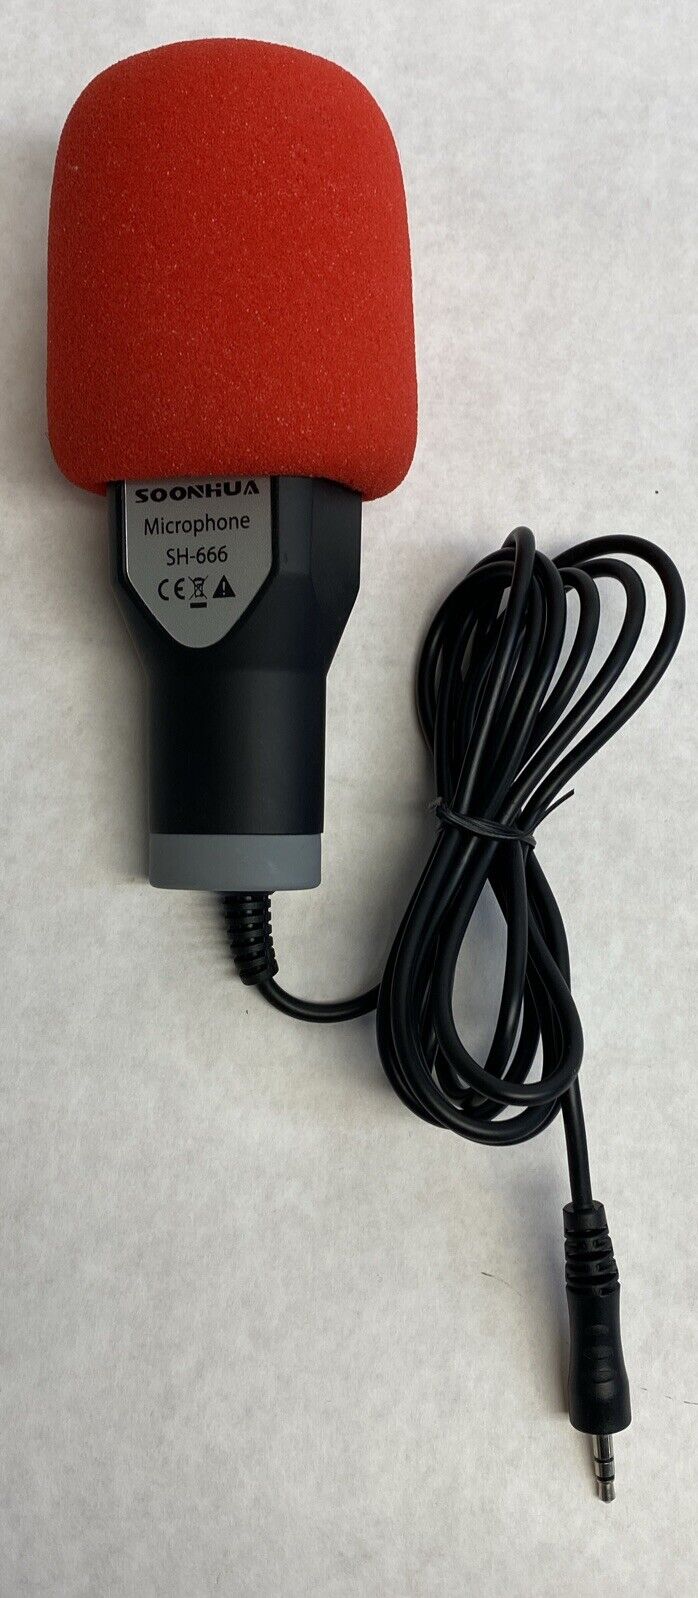 Soonhua SH-666 Microphone ONLY 4ft 3.5mm Cable Tested NO ACCESSORIES